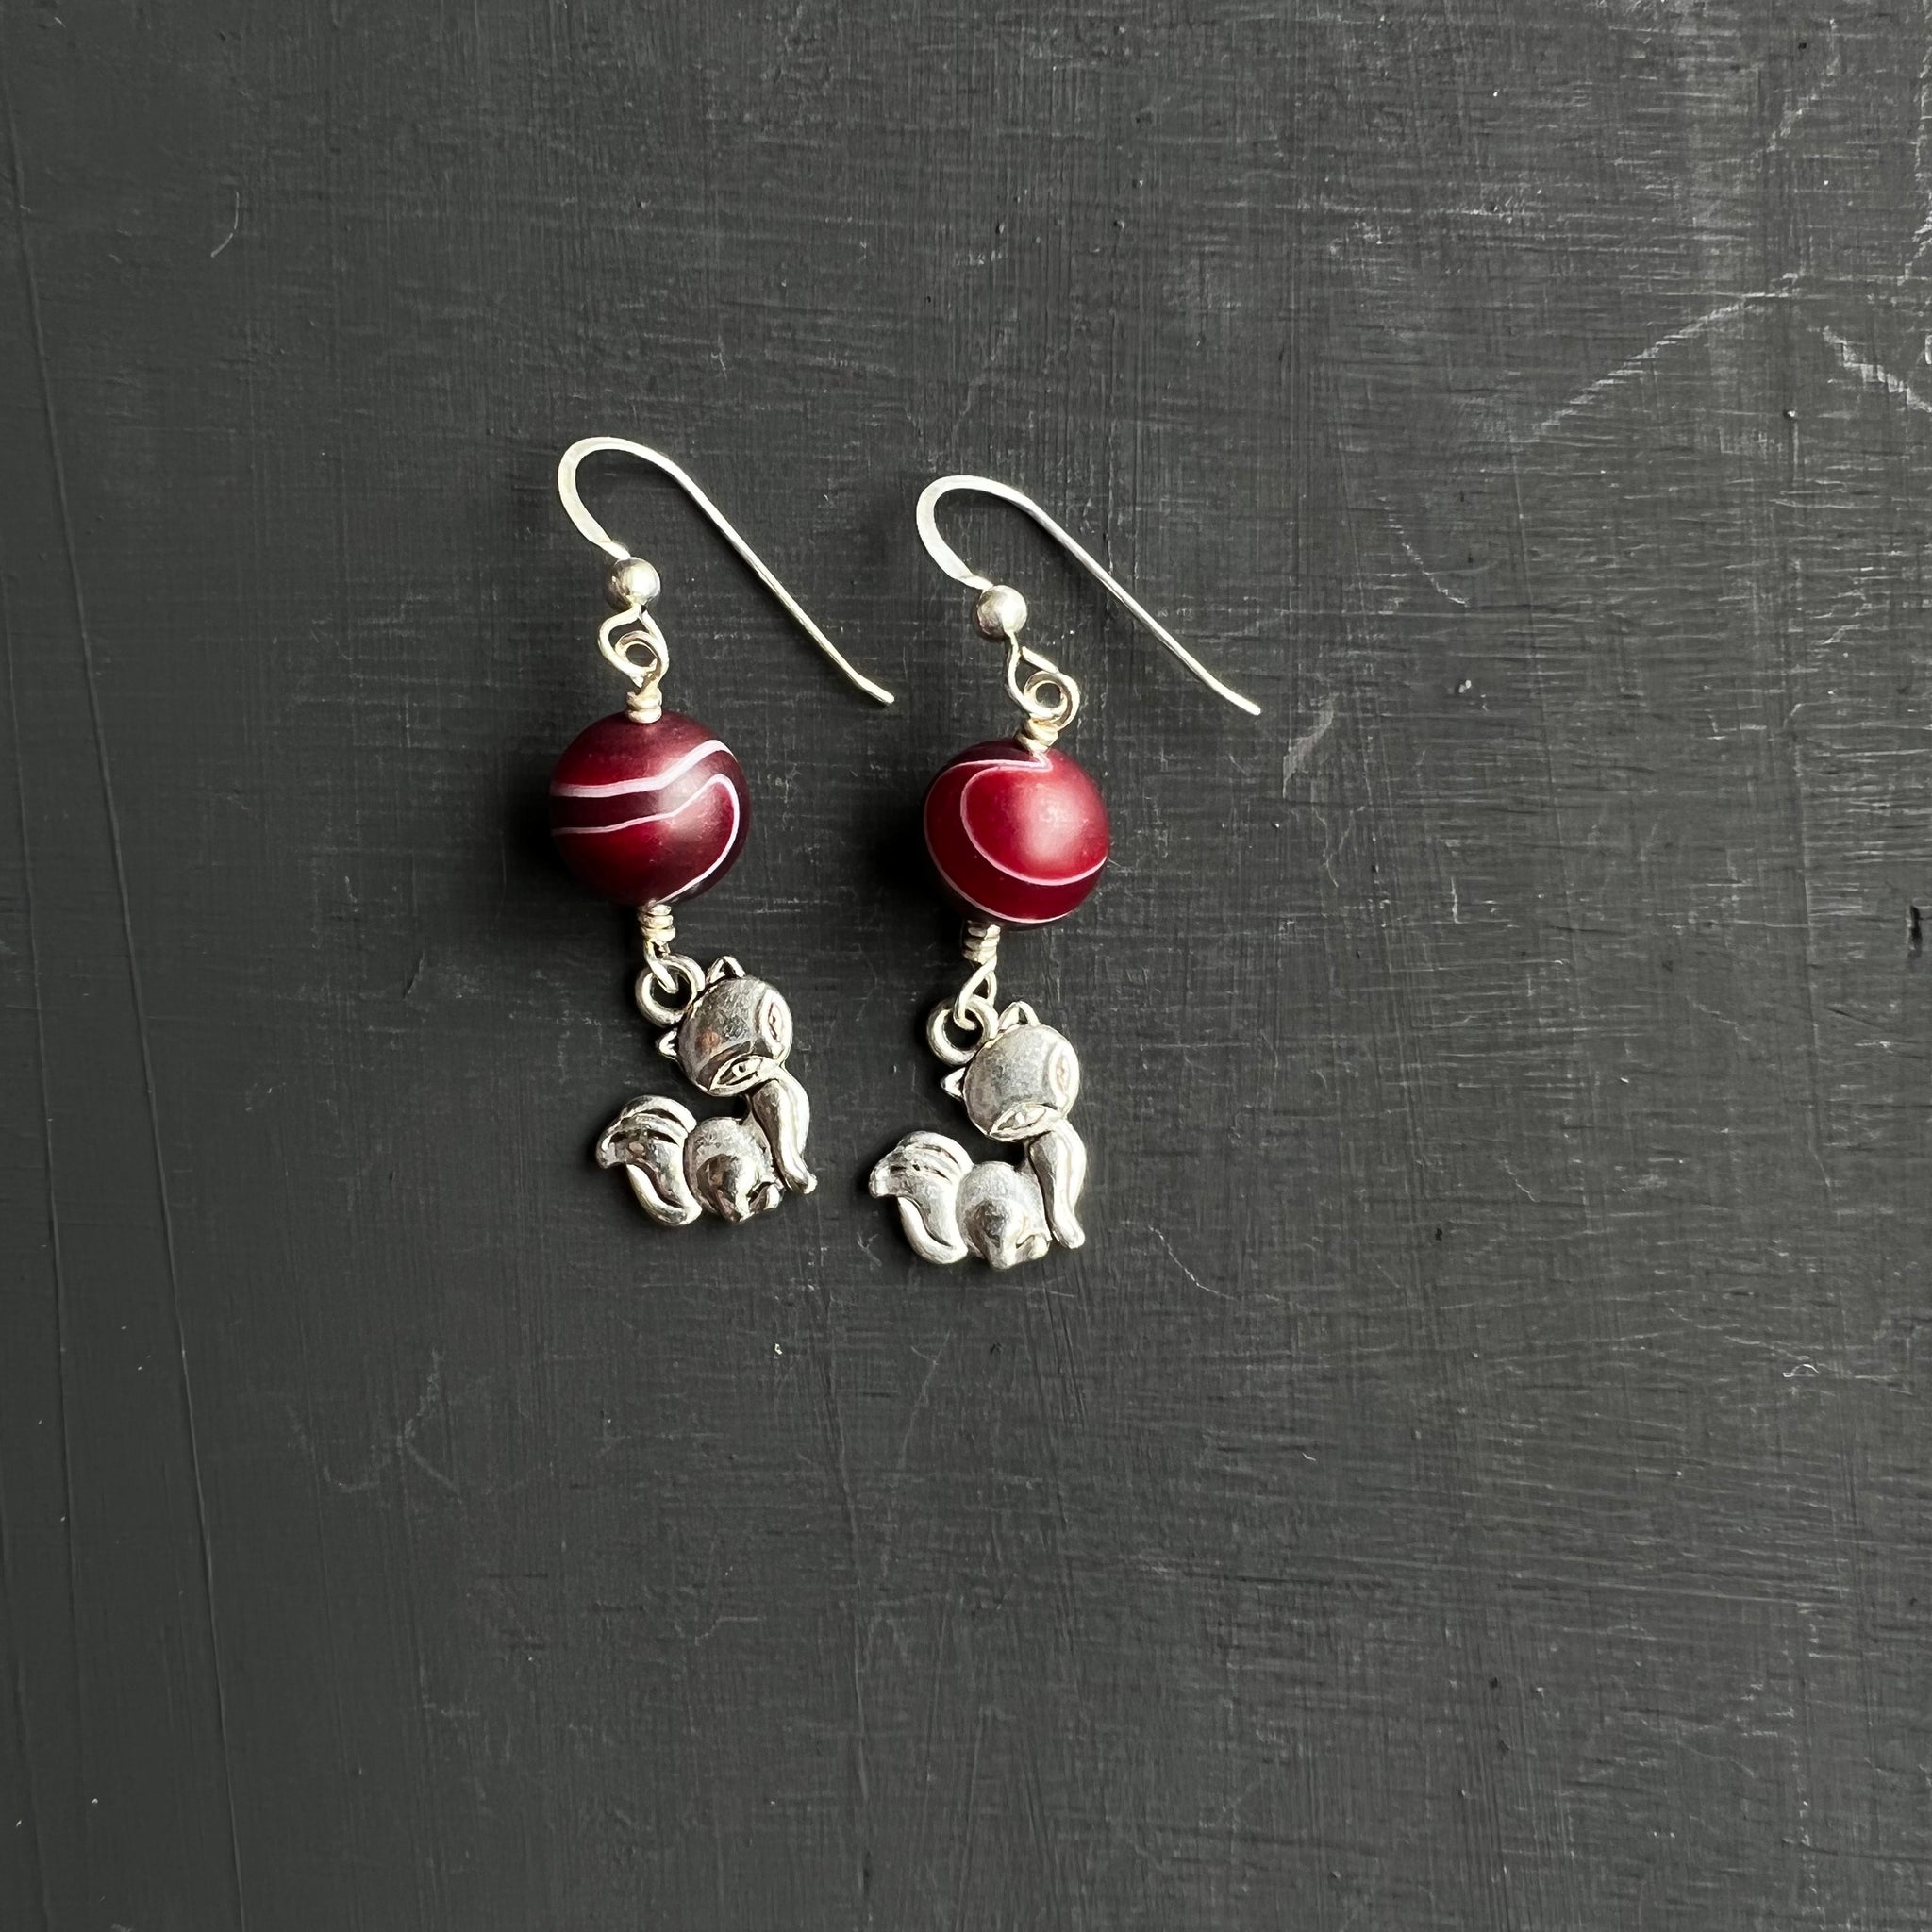 Dyed stone with fox charm earrings